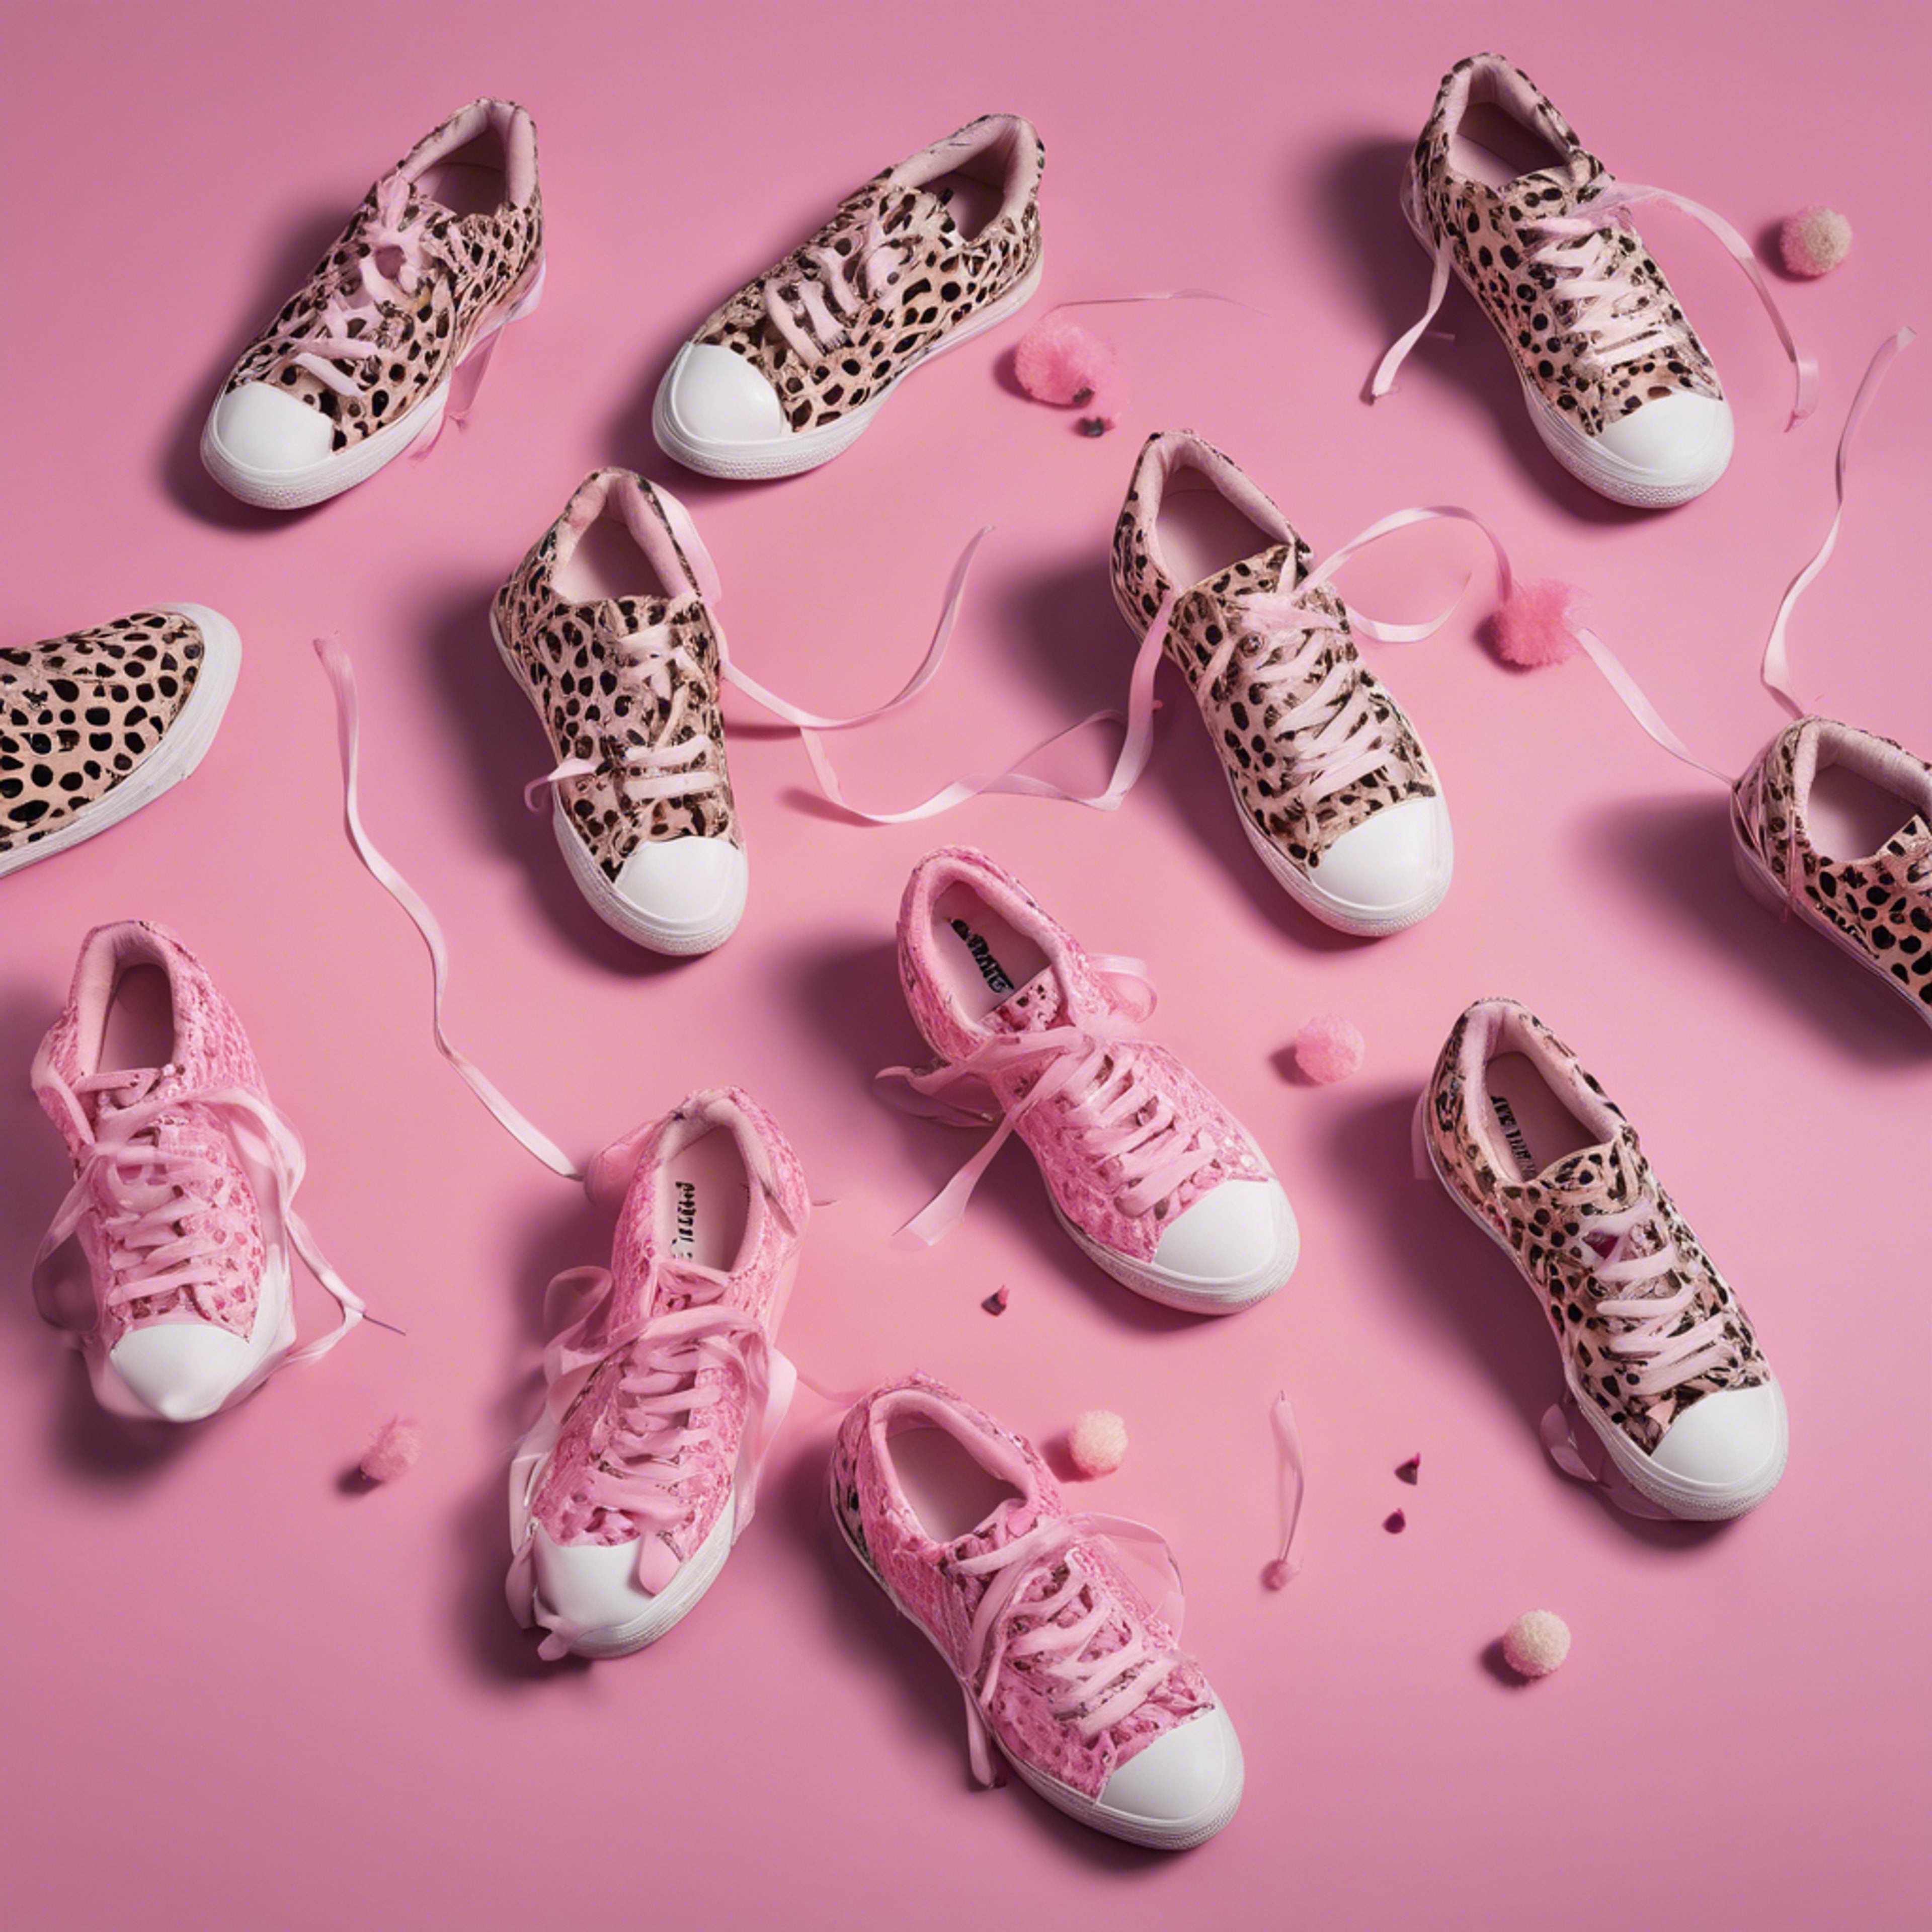 An aerial view of a pair of tennis shoes with a girly pink cheetah pattern. 벽지[69b37b649749417cbf35]